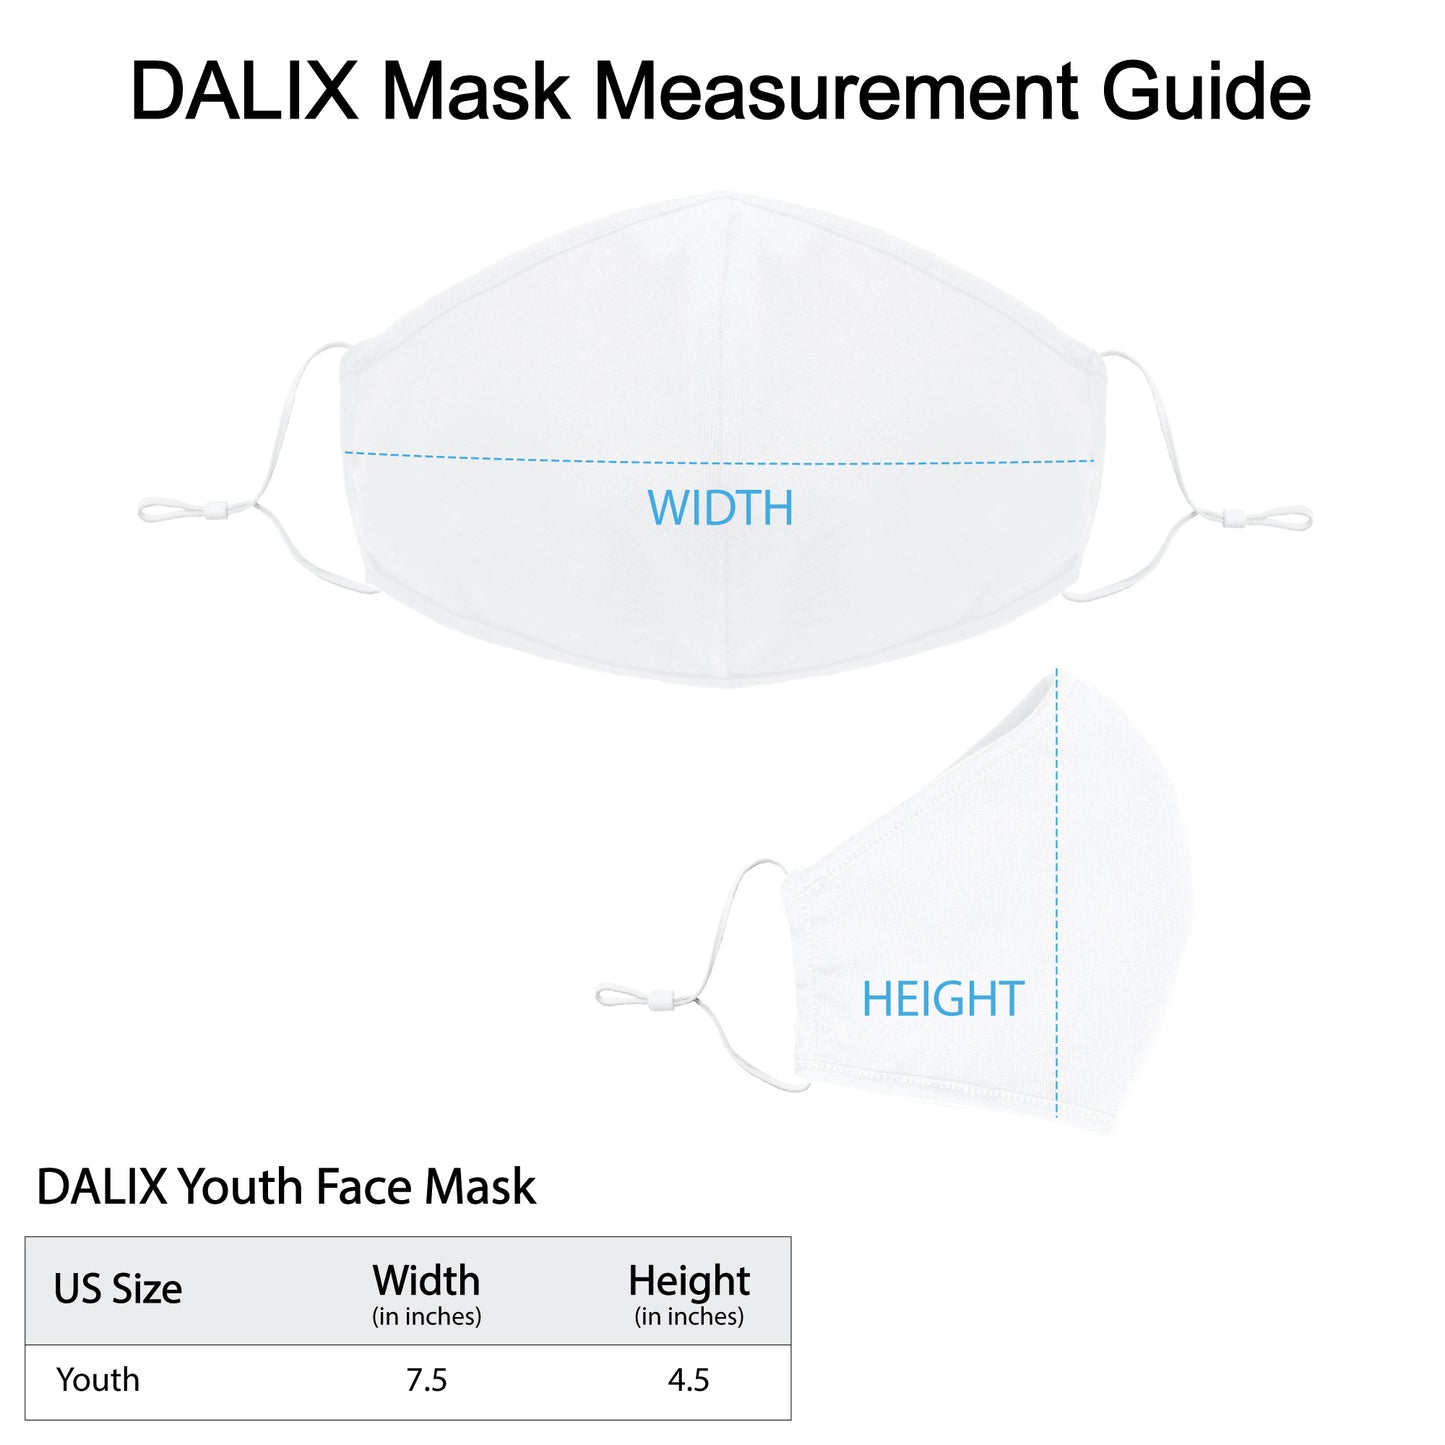 Dalix Kids Cotton Face Mask Reuseable Washable Made in USA - XXS-XS Size 3 Pack